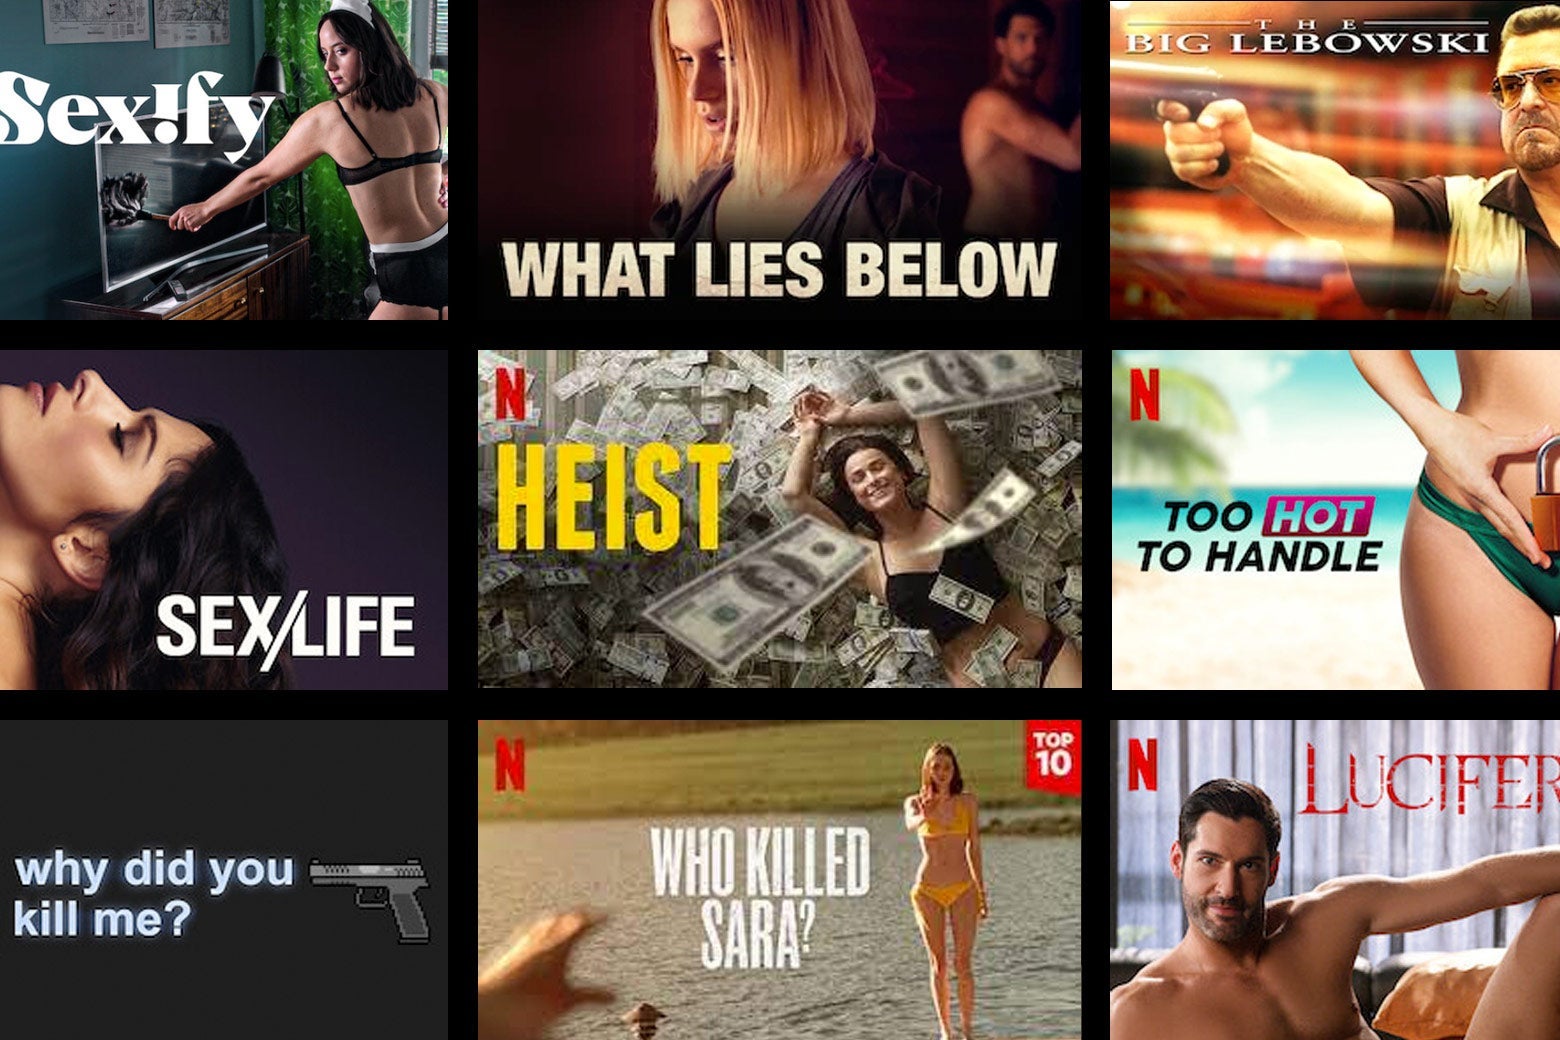 Netflix Top 10 The streaming services clickbait problem threatens to ruin photo